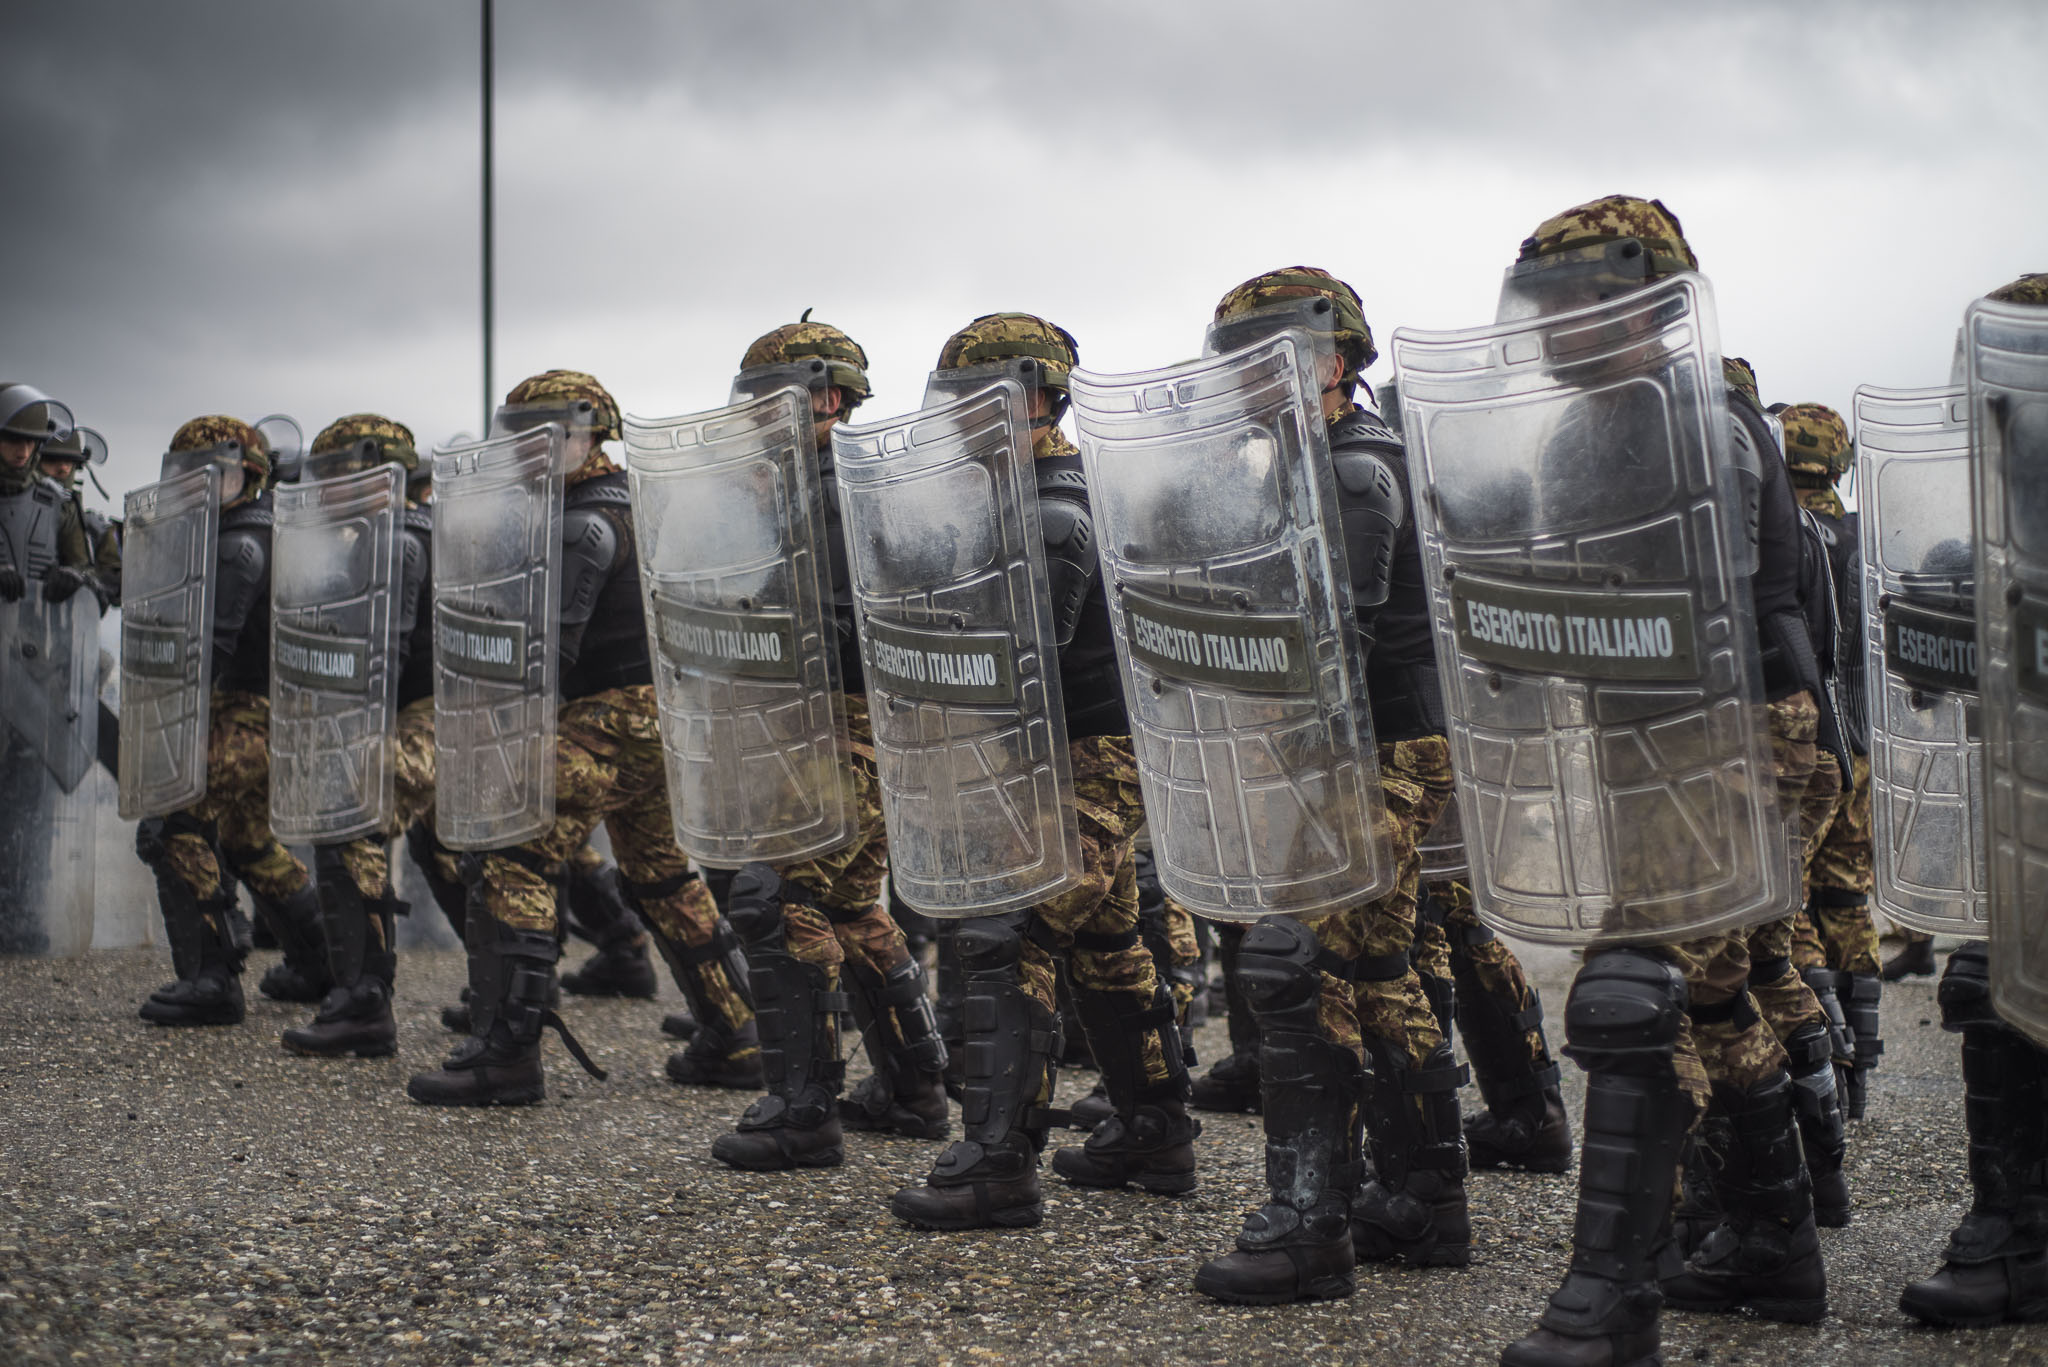 Photo: Kosovo: Multinational Battle Group West Italian soldiers of the Multinational Battel Group West lined up in front and with raised shields during a phase of crowd control training. Credit: Italian Ministry of Defense via Flickr https://flic.kr/p/238Akrg